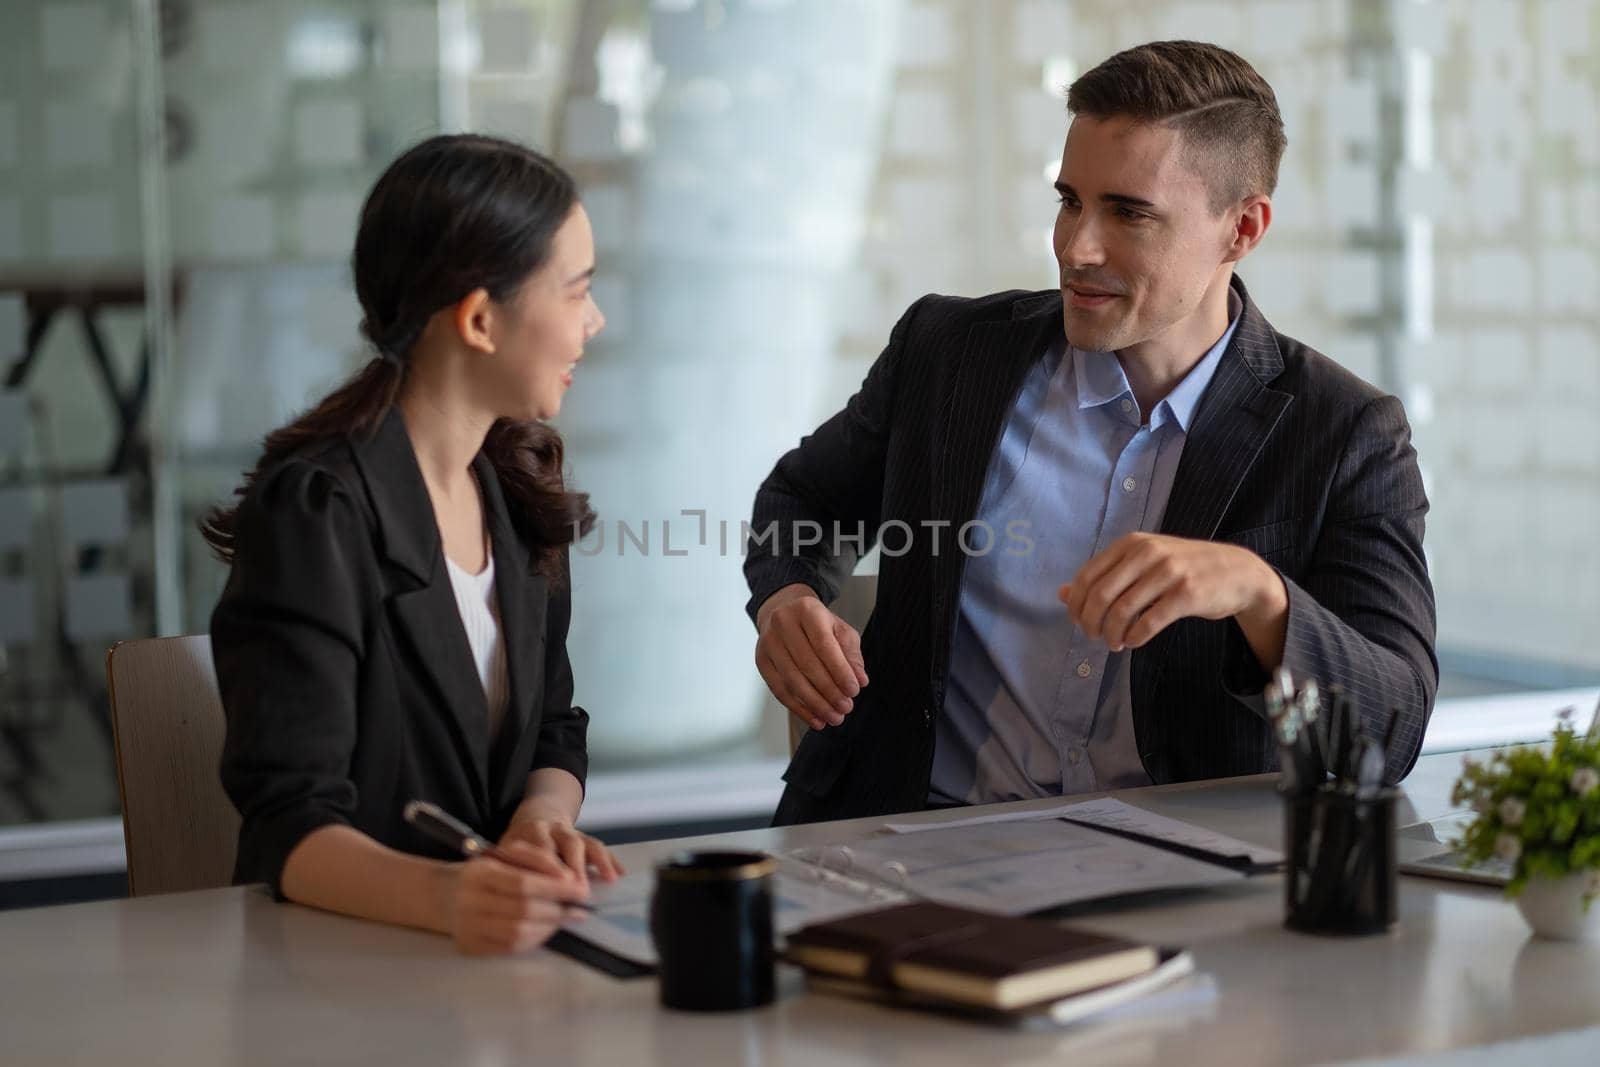 Multiethnic male caucasian mentor and female asian sitting at desk with laptop doing paperwork together discussing project financial report. Corporate business collaboration concept.